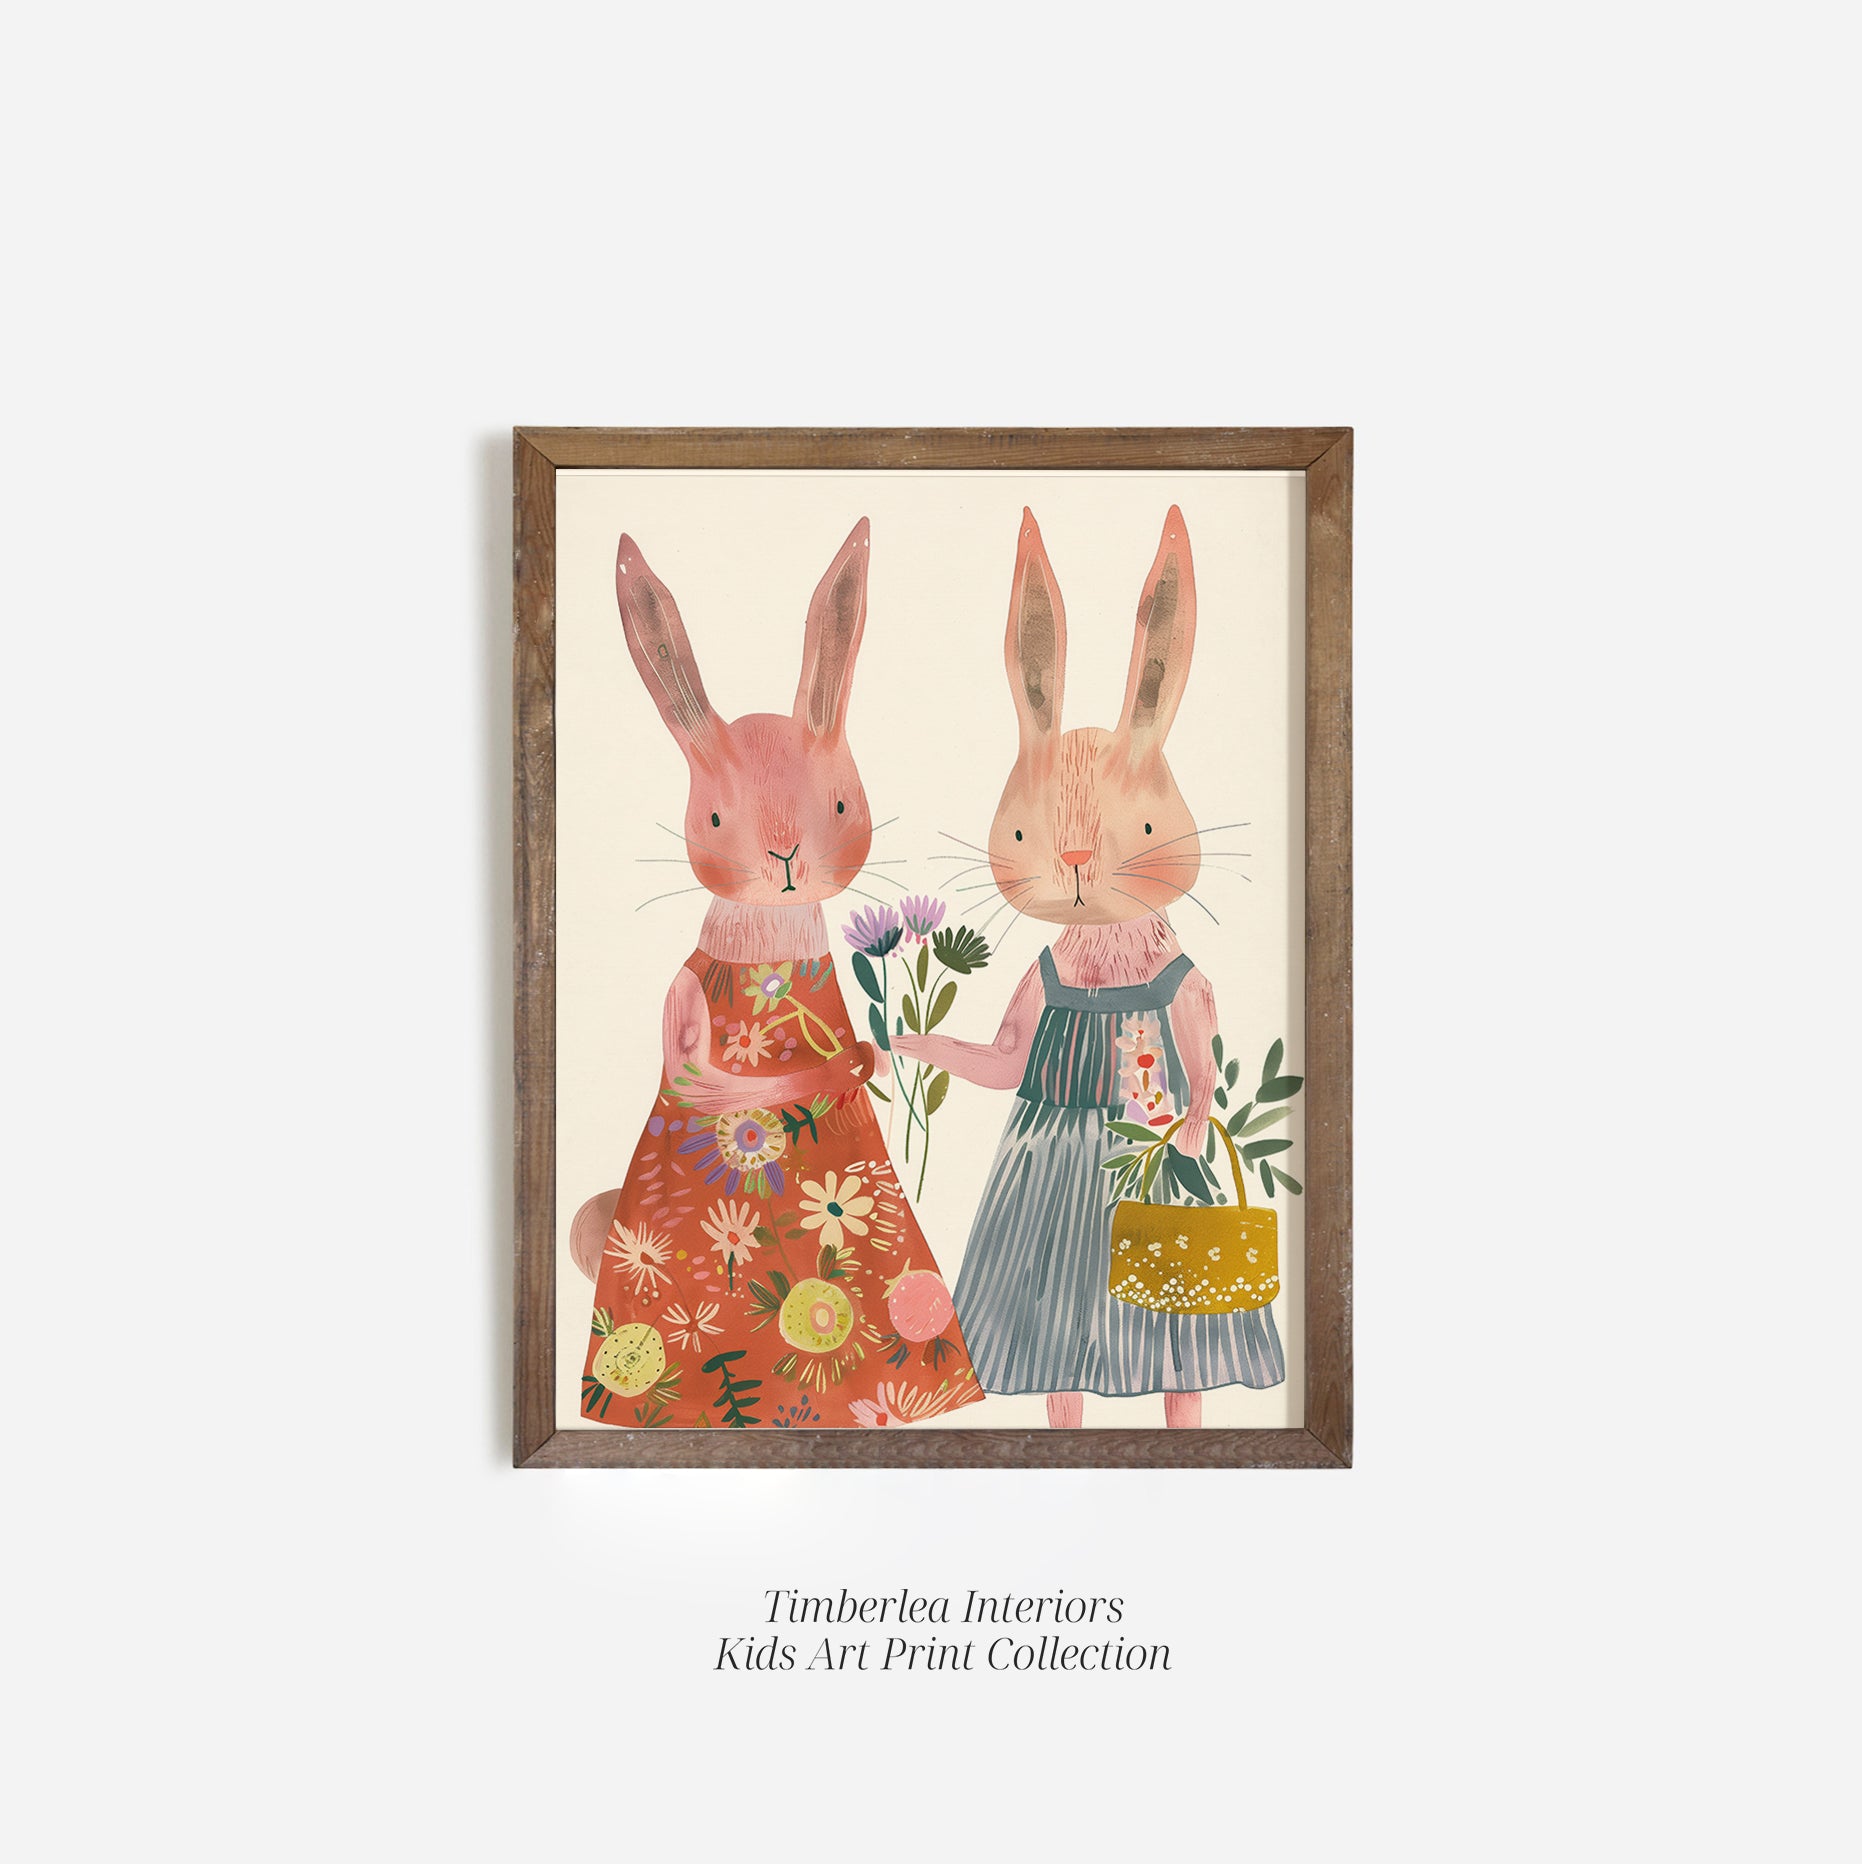 Whimsical art print of two adorable bunnies in charming outfits, holding flowers and a basket, framed in a rustic wood frame.